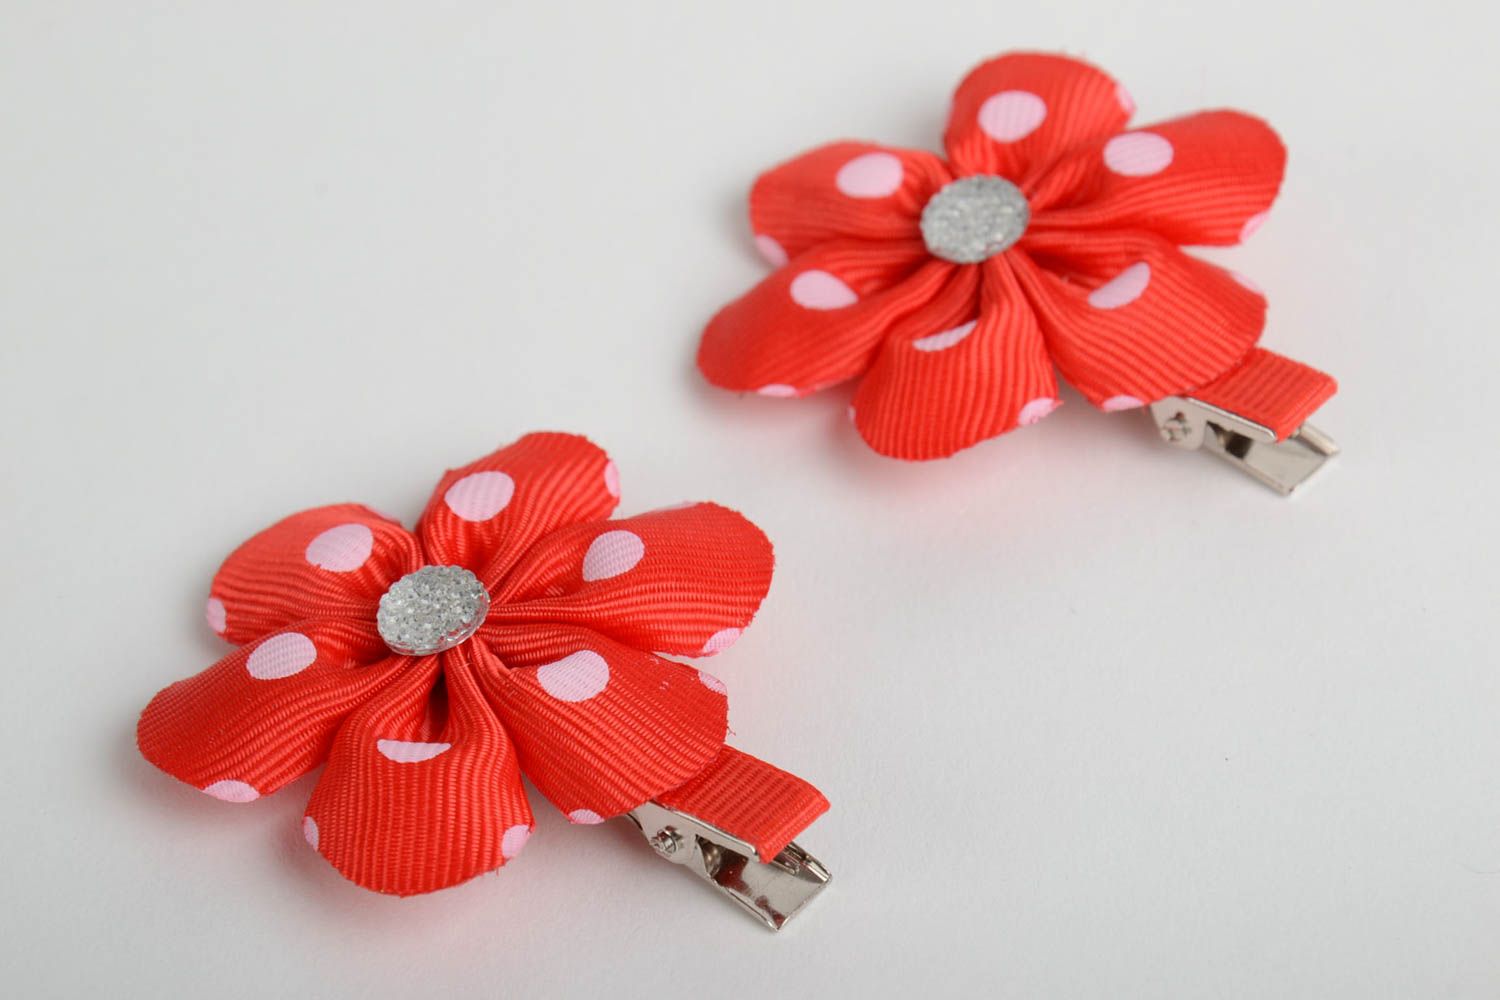 Handmade hair clips with red polka dot satin ribbon flowers set of 2 items photo 2